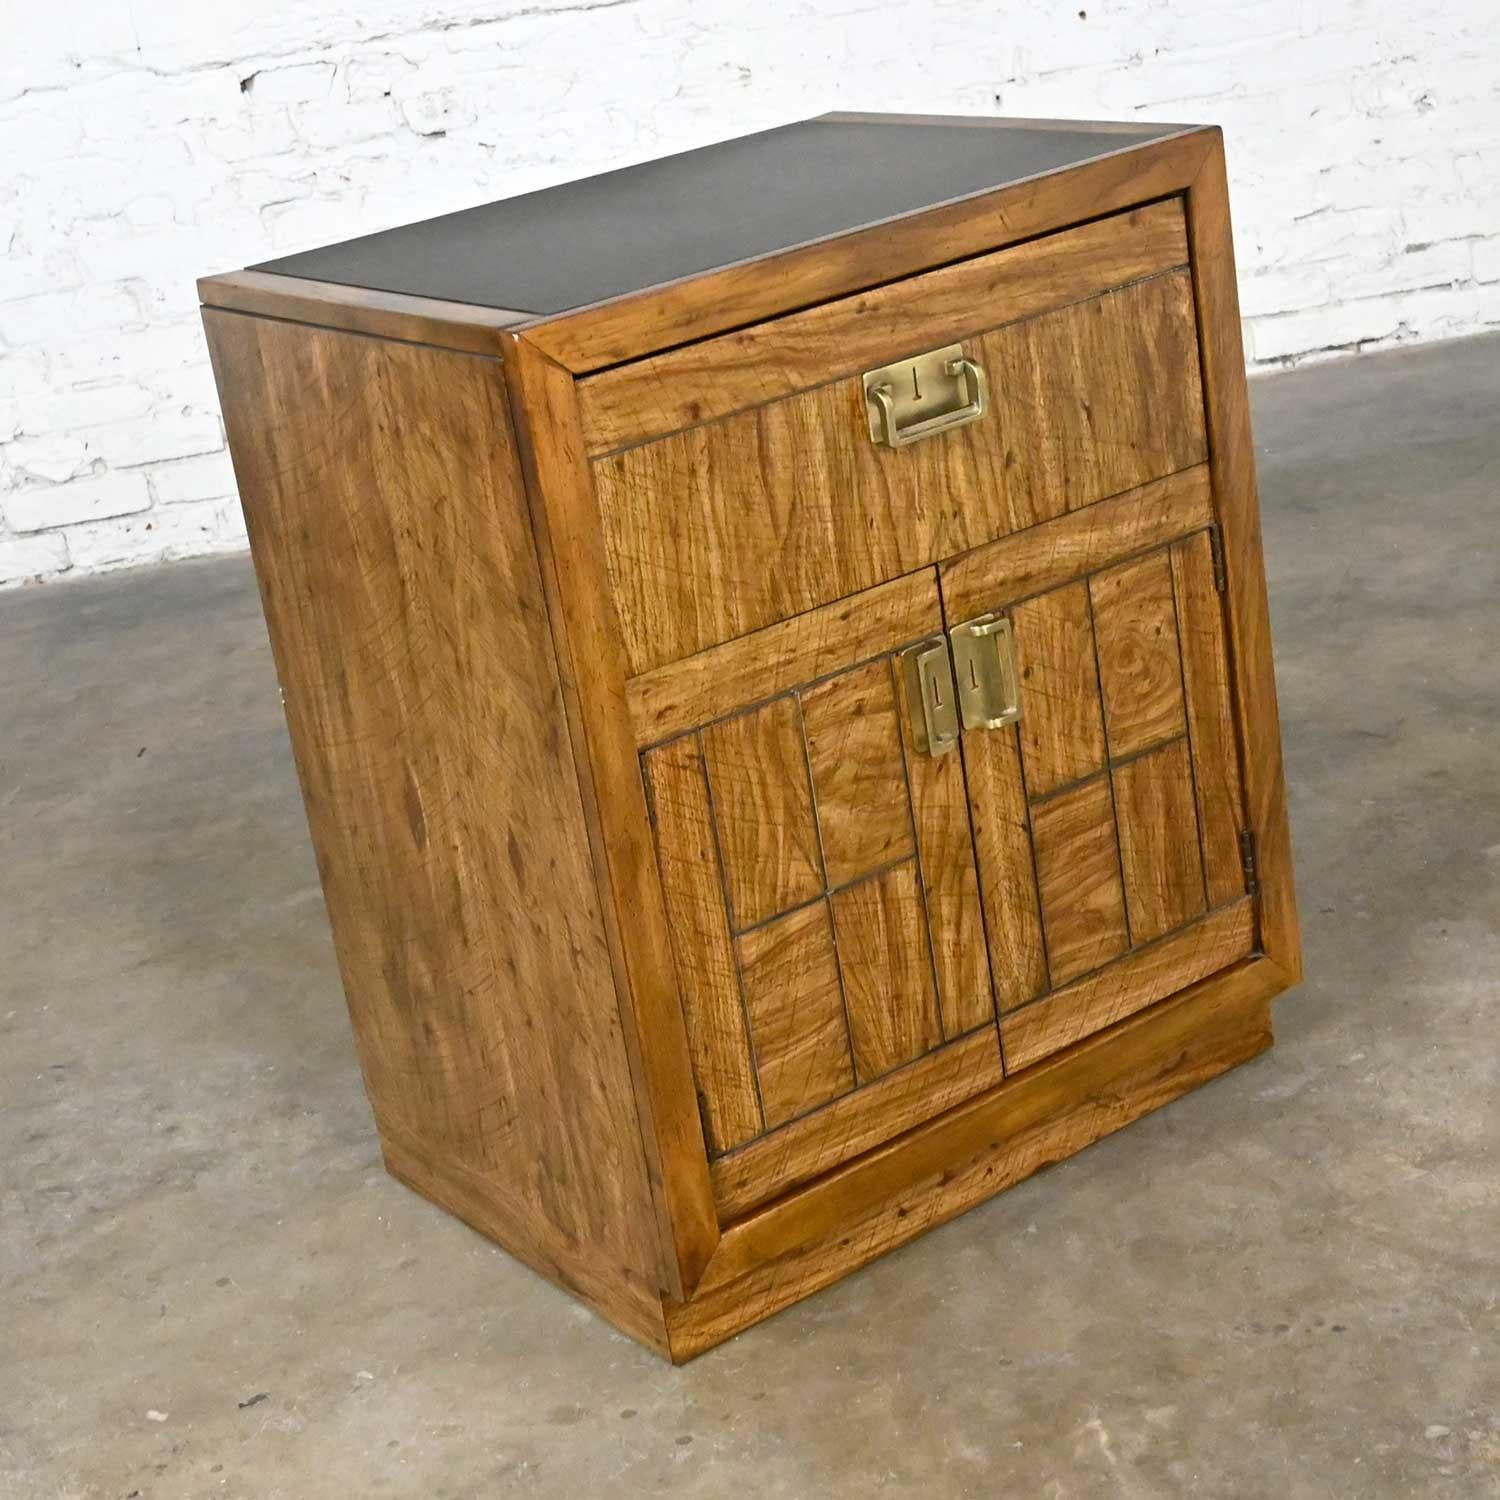 Vintage Drexel Weatherwood Collection Campaign Style End Table Cabinet or Chest In Good Condition For Sale In Topeka, KS